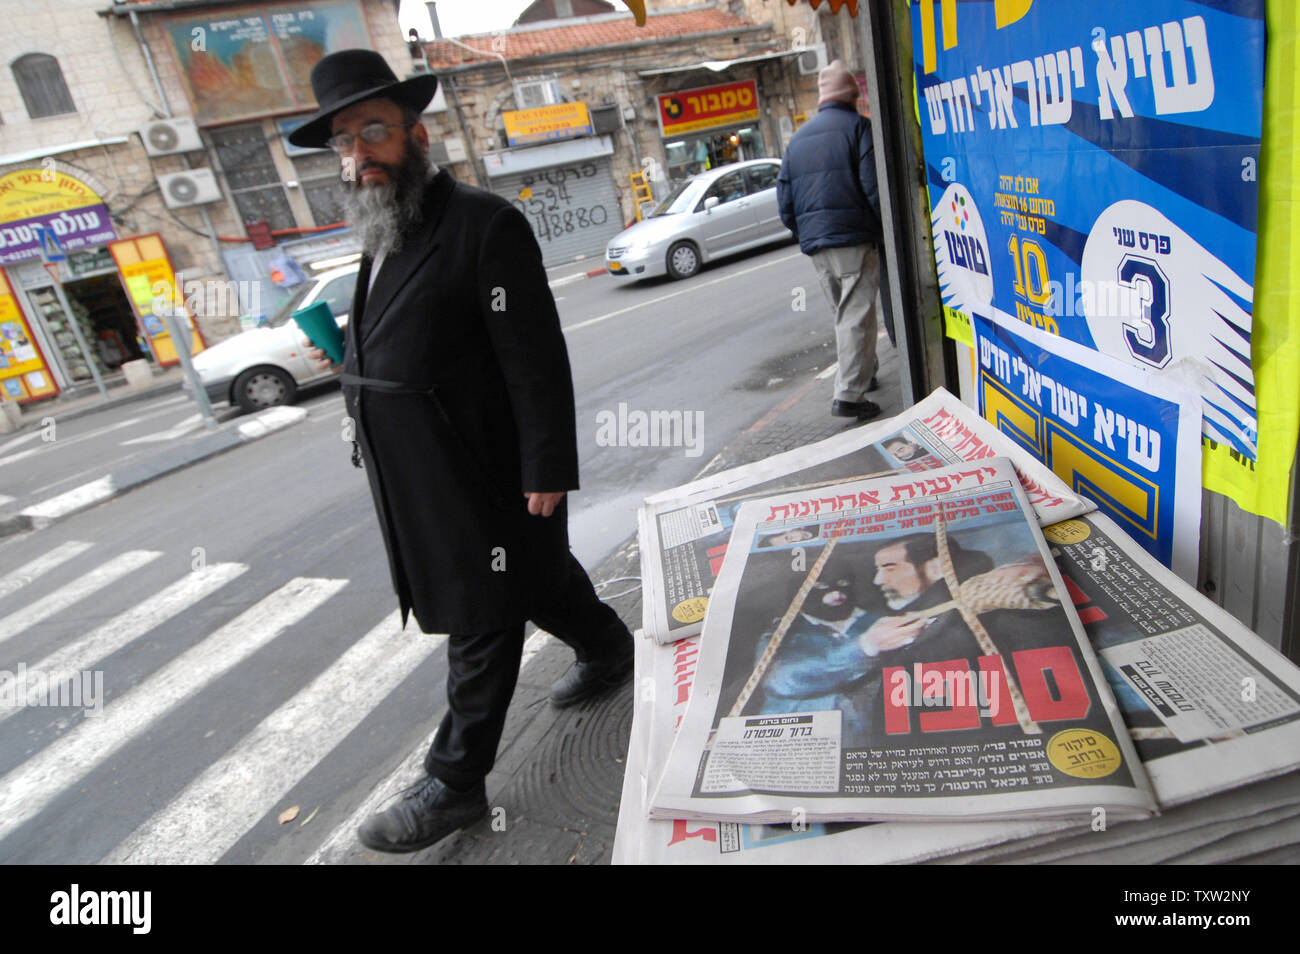 An Ultra-orthodox Jew walks by Israeli newspapers reading 'His End' with a photograph of  the execution of former Iraqi President Saddam Hussein, December 31, 2006, in Jerusalem.  (UPI Photo/Debbie Hilll) Stock Photo